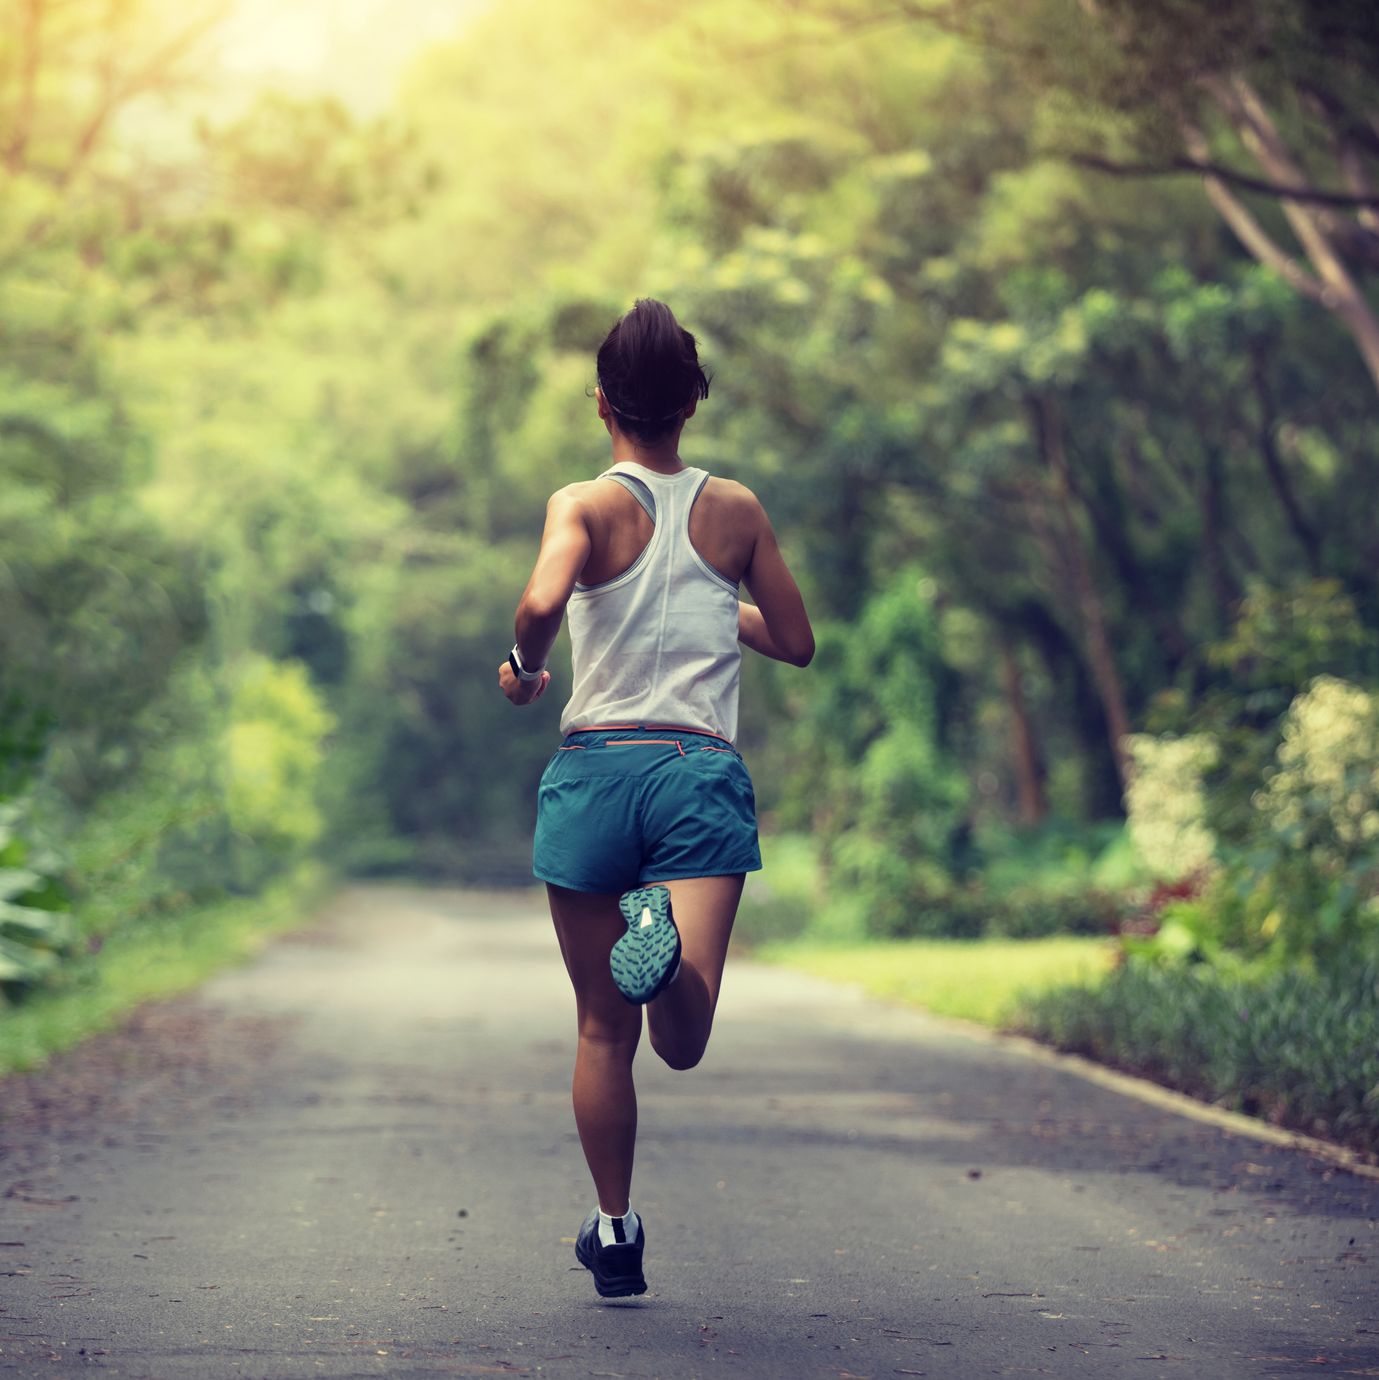 How to make running a habit for longer than the lockdown